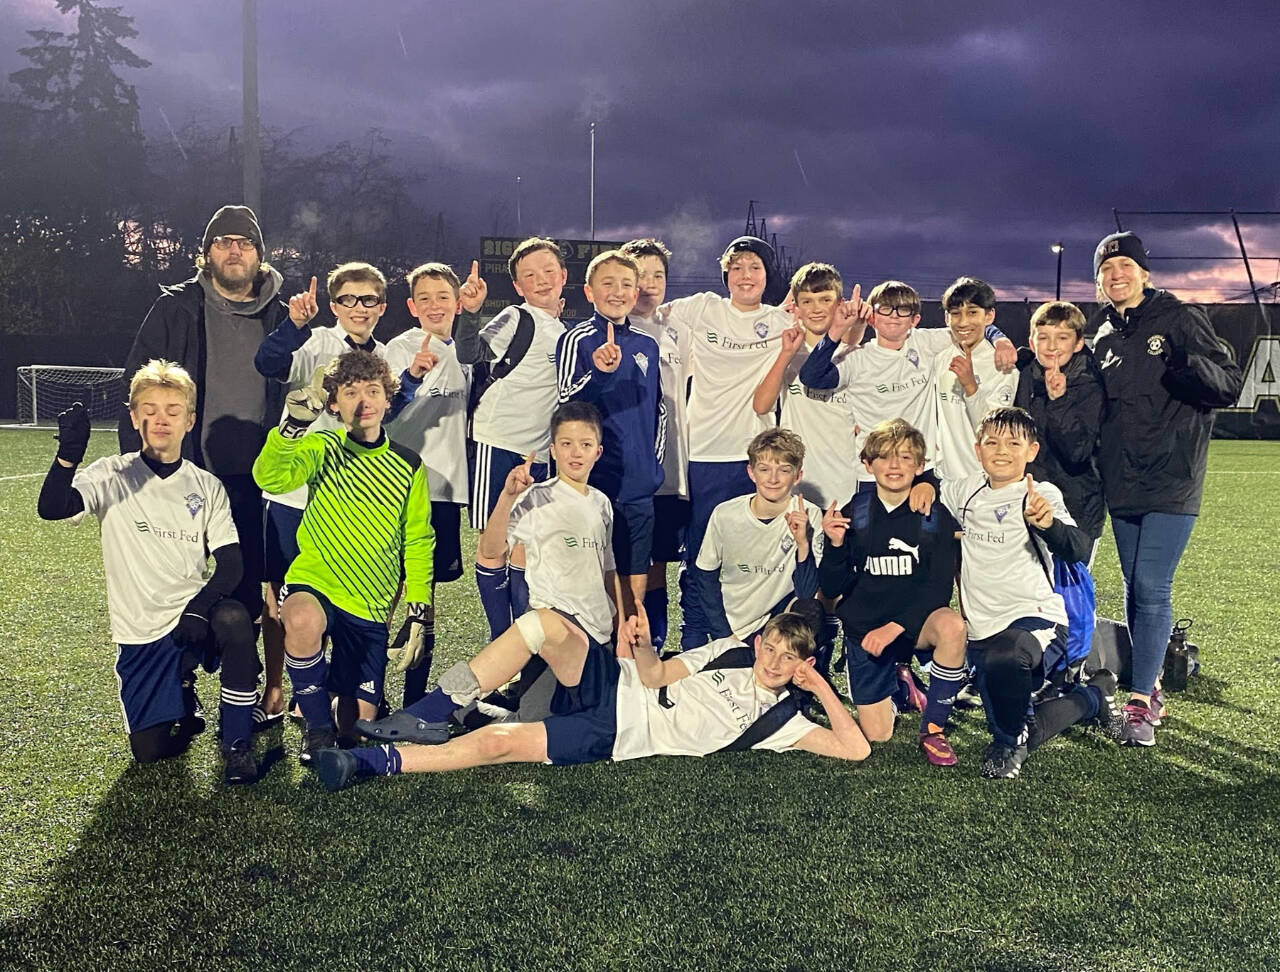 The Storm King U13 Thunder won its North Puget Soccer League division with an 11-1-0 record. From left, back row, are head coach Jared King, Harper Willis, Max Sturdevant, Riley Brown, Ben Bower, Jake Loushin, Taihvan Lyle, Ashton Gedelman, Cooper Twedt, Gagan Seera, Chase Gardner and assistant coach Amanda Anderson. From left, front row, are Zeke Banks, Eden Peterson, Kanyon Anderson, Trevor Goff, Kannon King and Favian Caiola. Lying on the grass is Abe Brenkman. Photo courtesy of Amanda Anderson